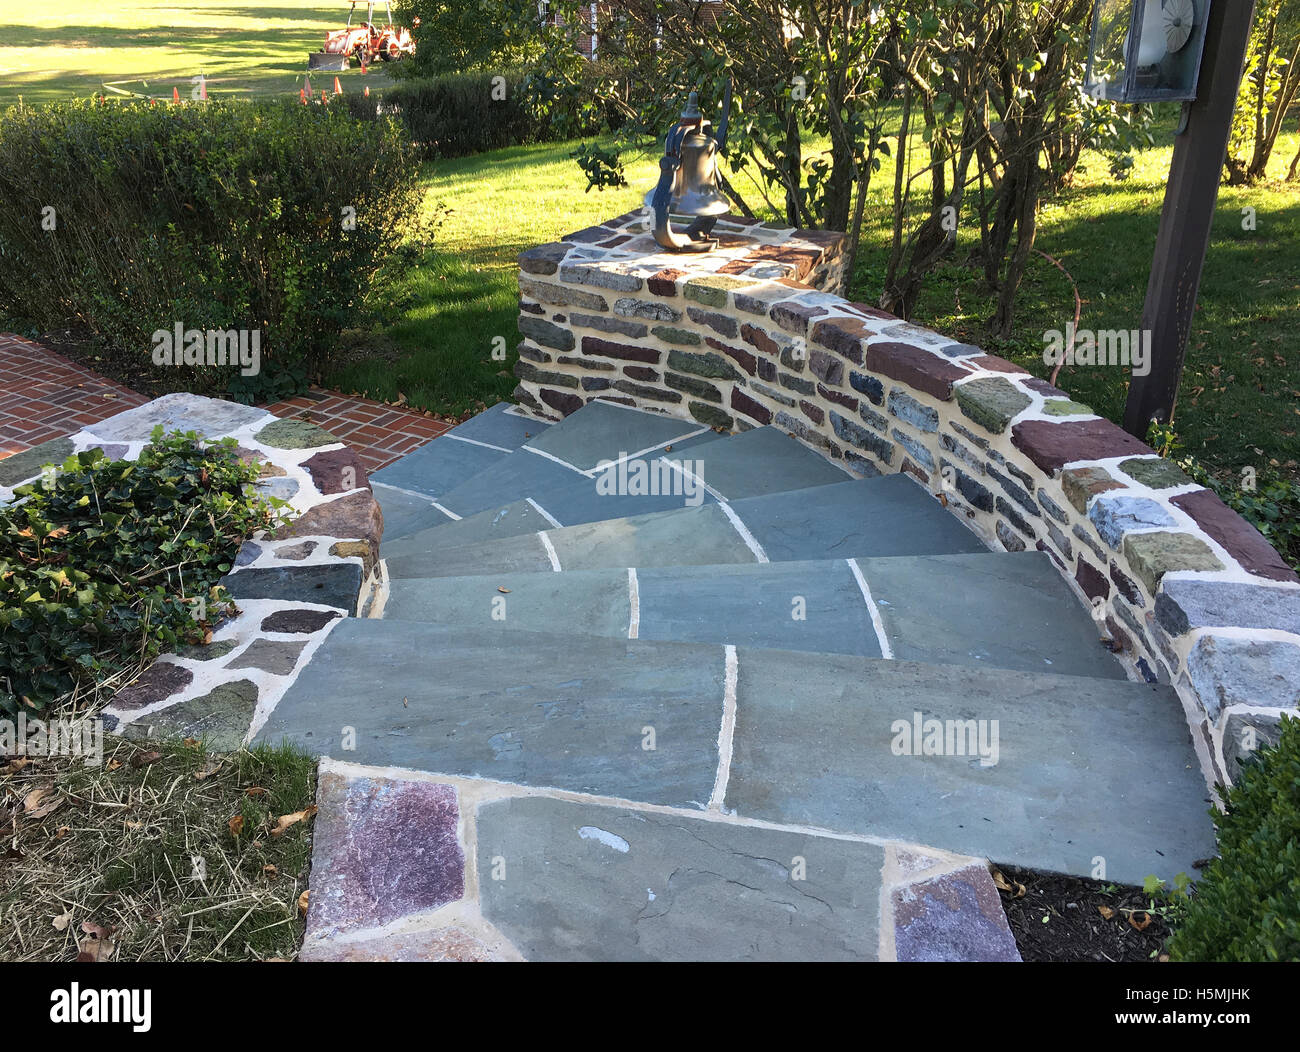 flagstone pavers for curved steps leading down to a brick pathway in a garden Stock Photo